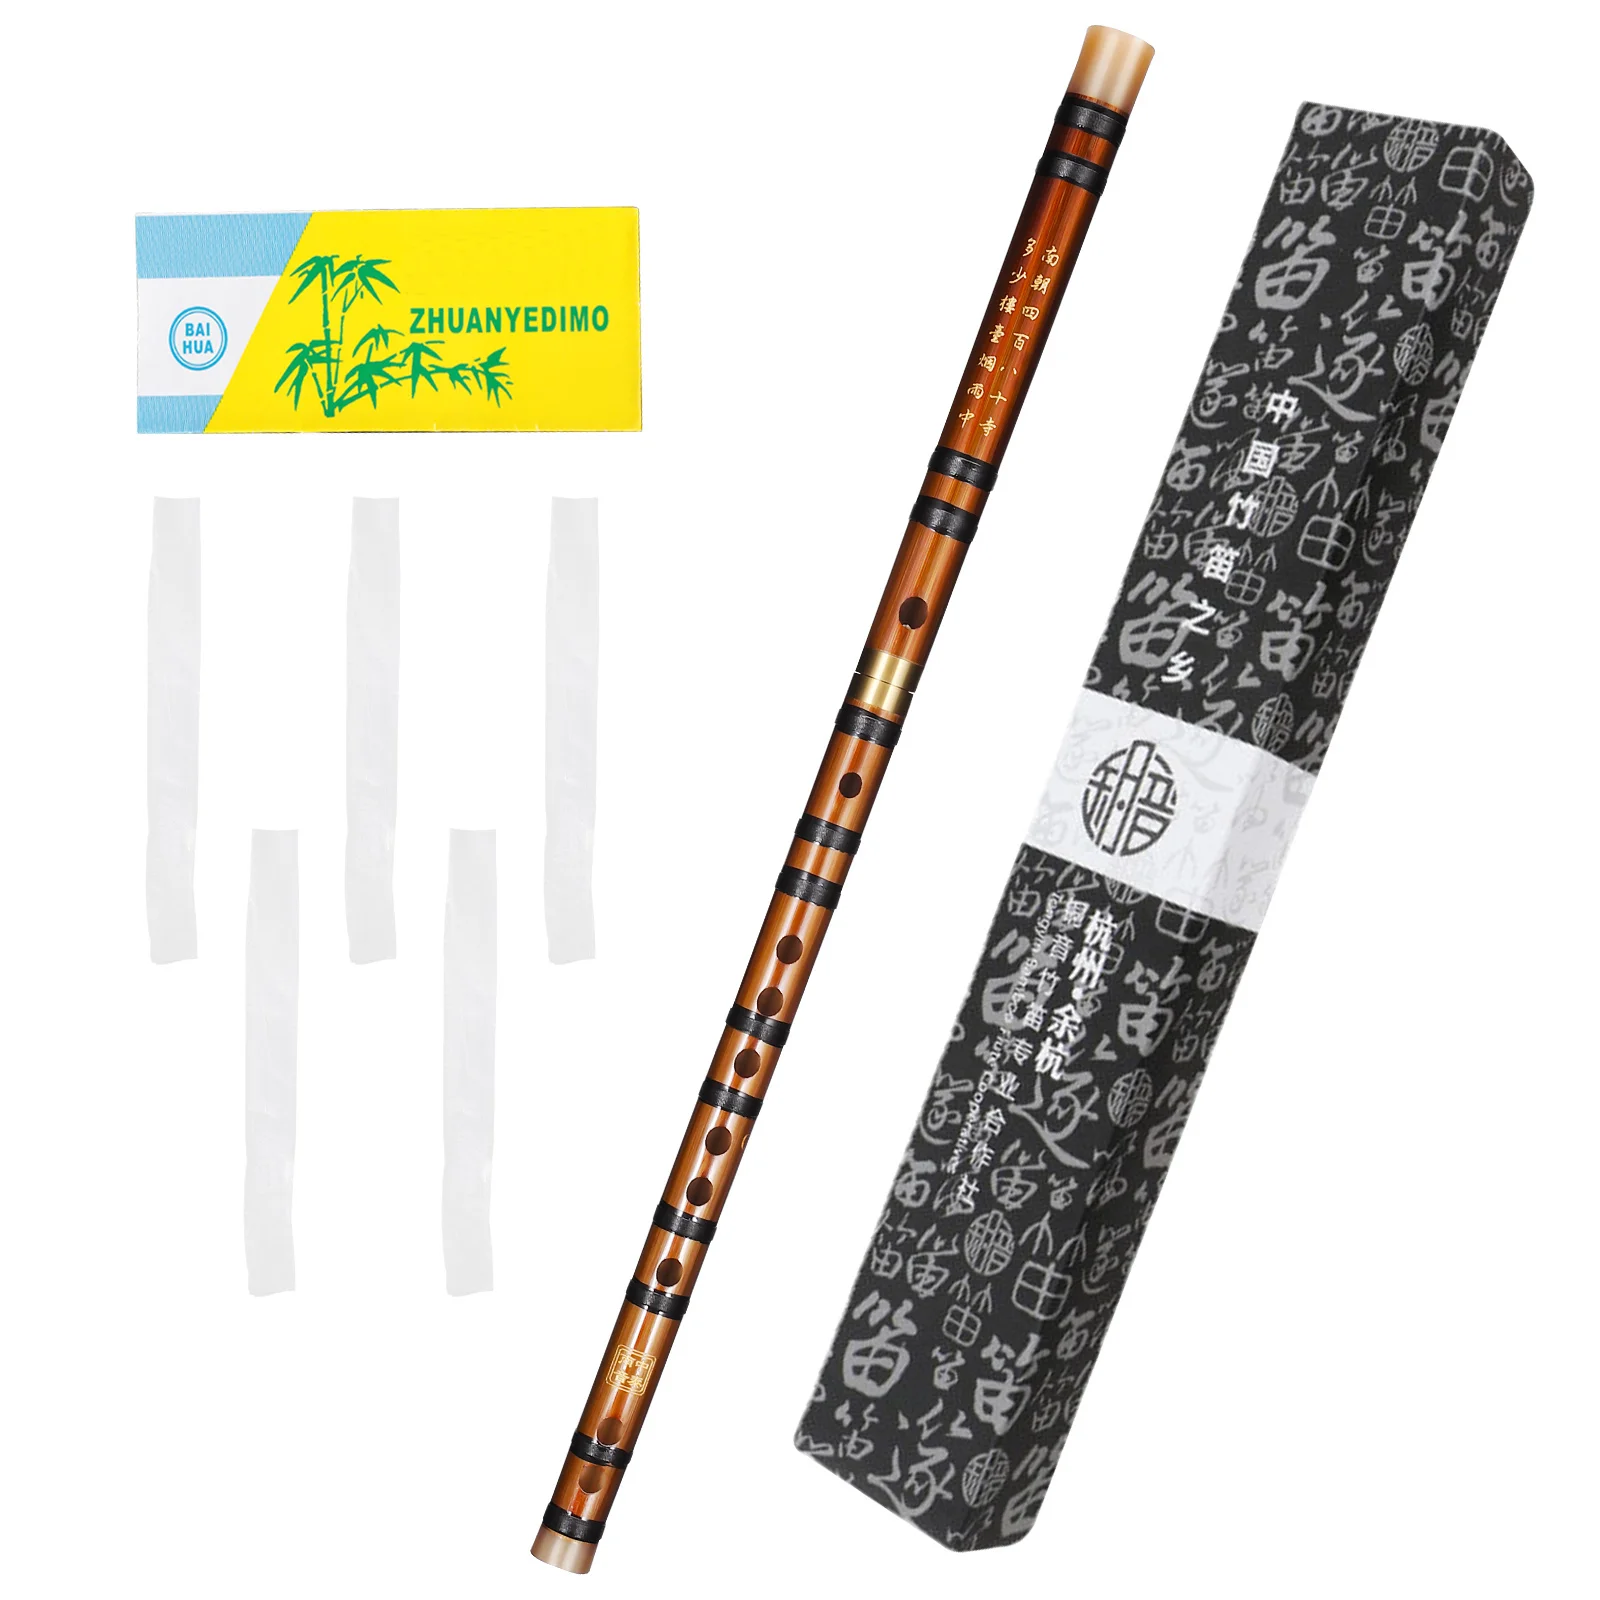 

G Key Bamboo Flute Music Accompaniment Instruments Orchestral Musical Adults G-key Kids' Students Bitter Professional